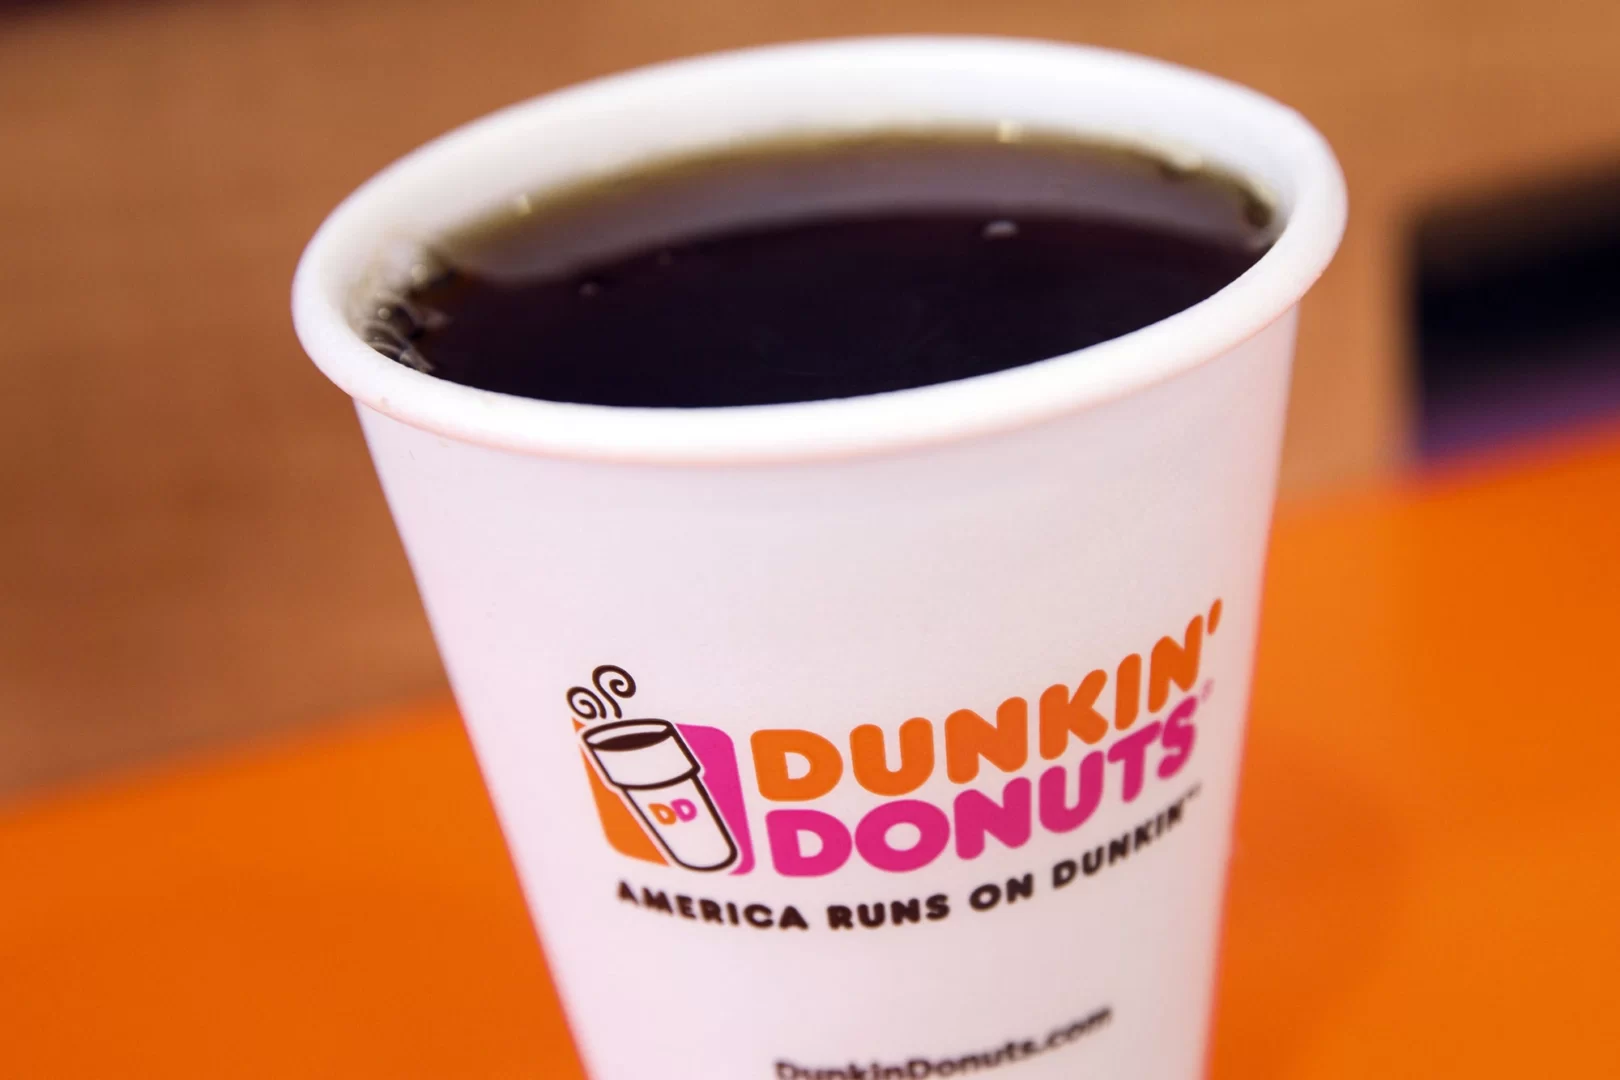 Dunkin' after hot coffee badly burns husband in New Jersey